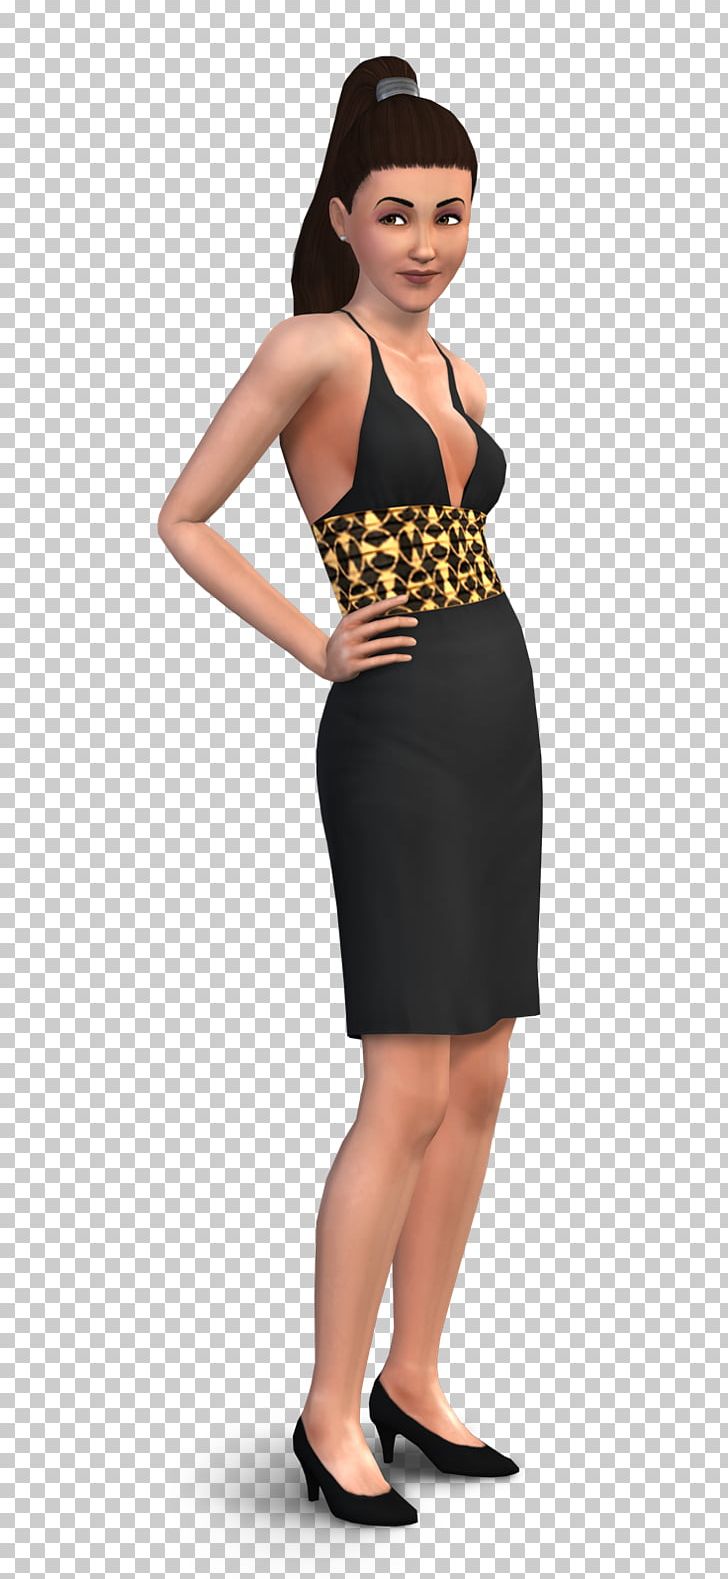 The Sims 3 The Sims 4 PlayStation 3 Xbox 360 PNG, Clipart, Abdomen, Cocktail Dress, Day Dress, Dress, Electronic Arts Free PNG Download